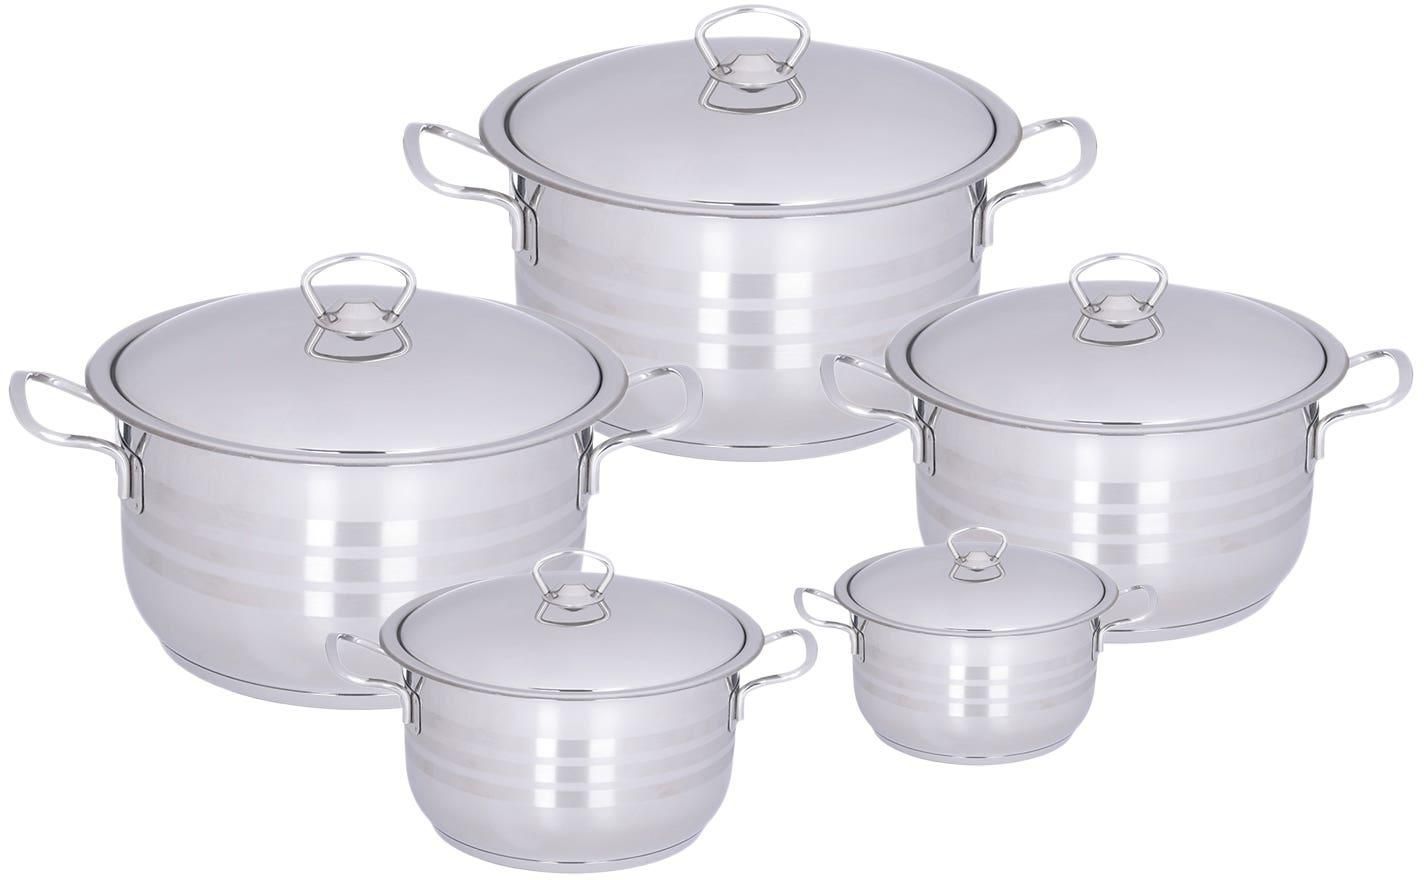 Get Aboud Stainless Steel Cookware Set, 10 Pieces - Silver with best offers | Raneen.com